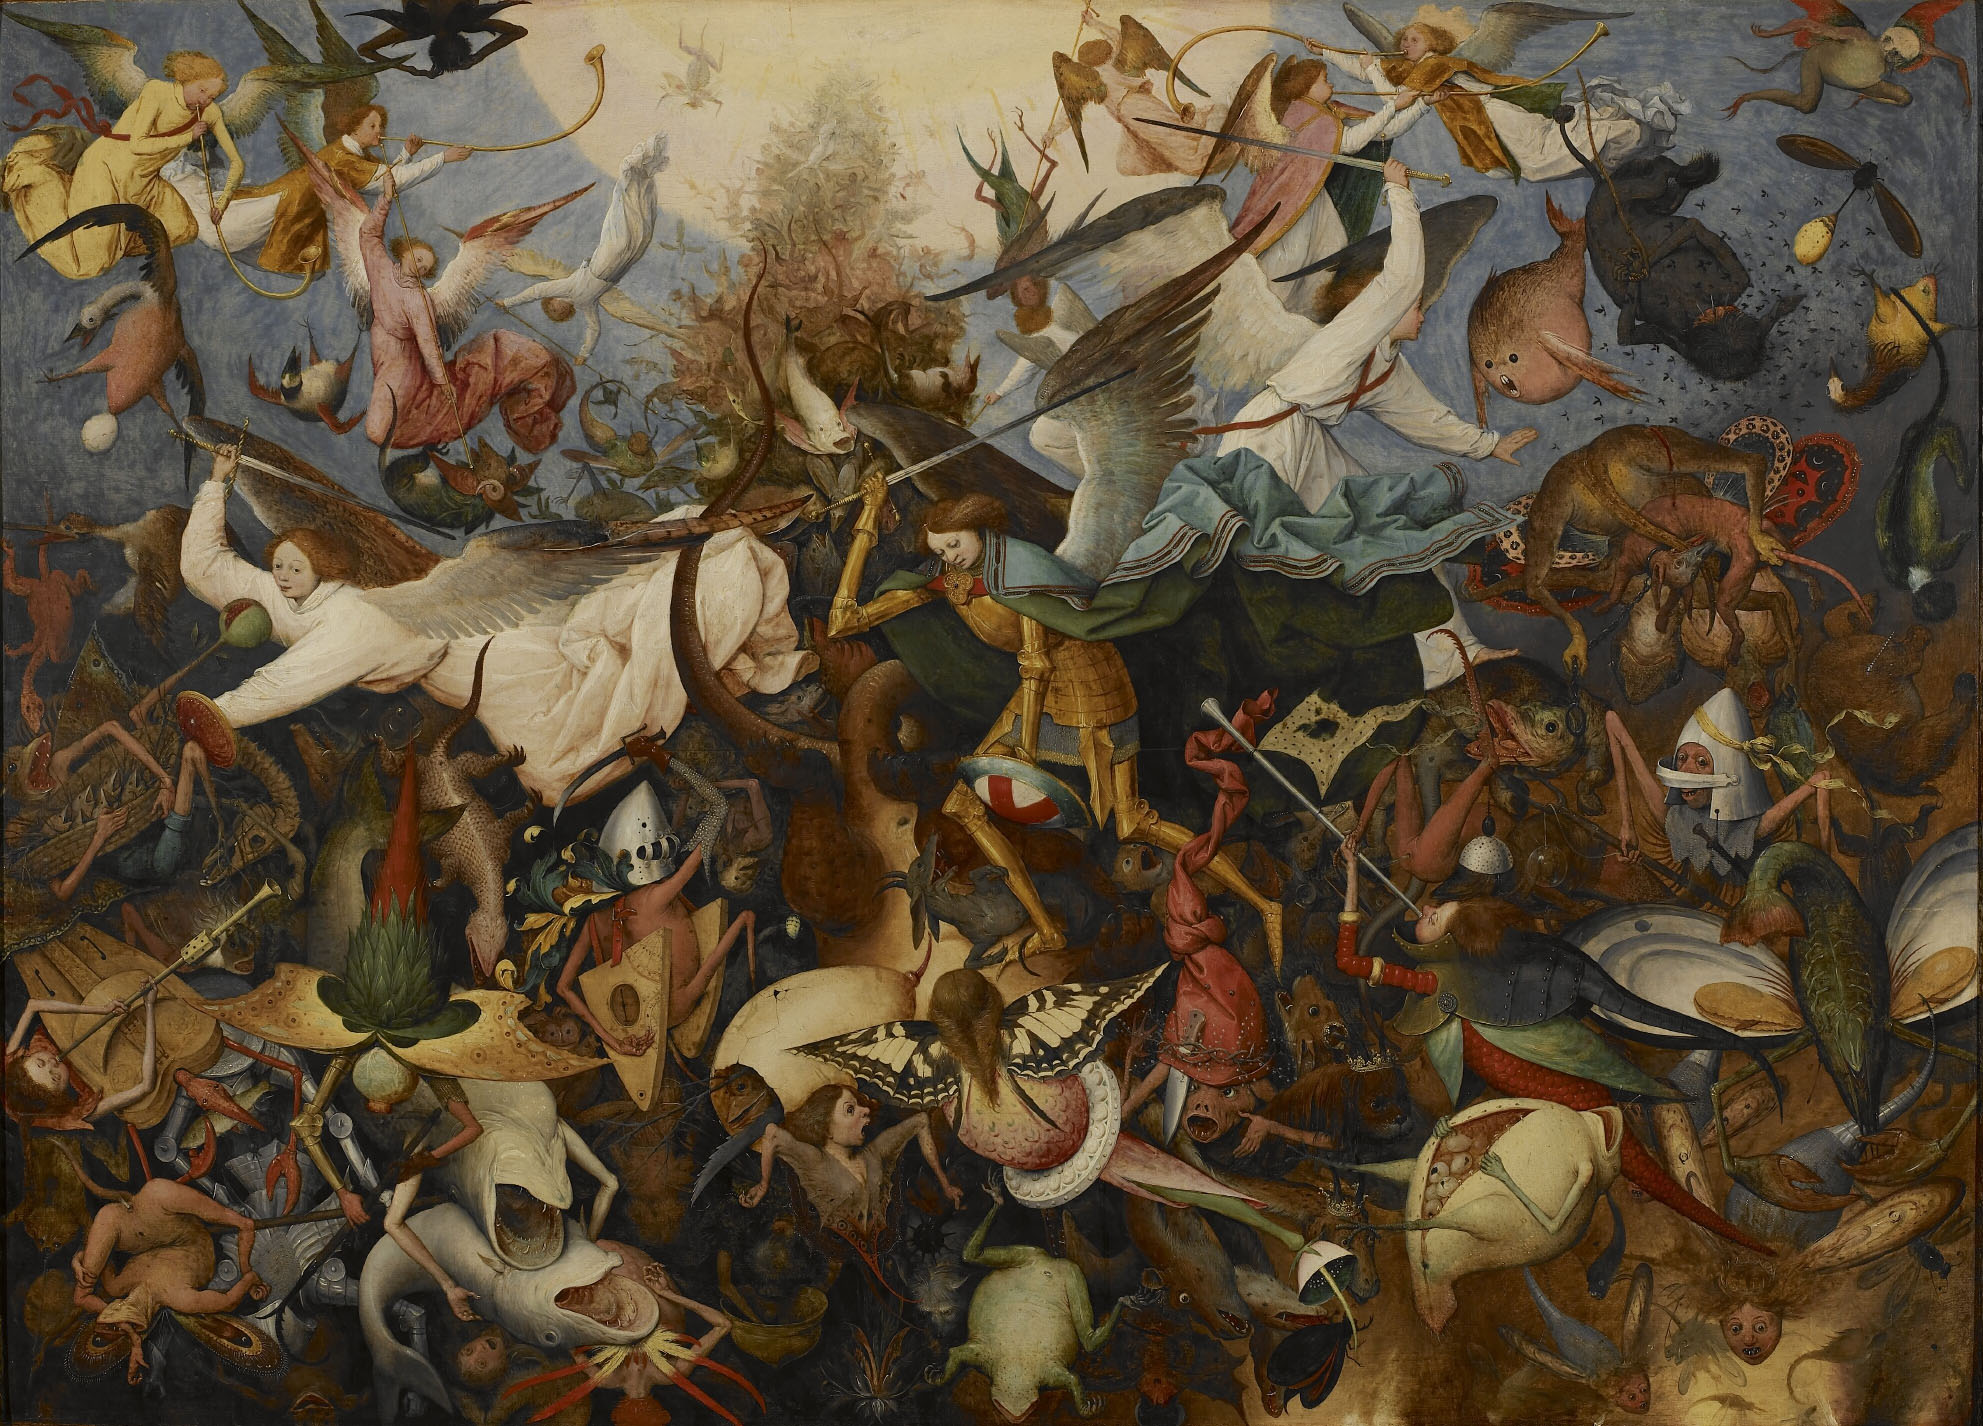 The Fall of the Rebel Angels by Pieter Bruegel the Elder - 1562 - 162 x 117 cm The Royal Museums of Fine Arts of Belgium